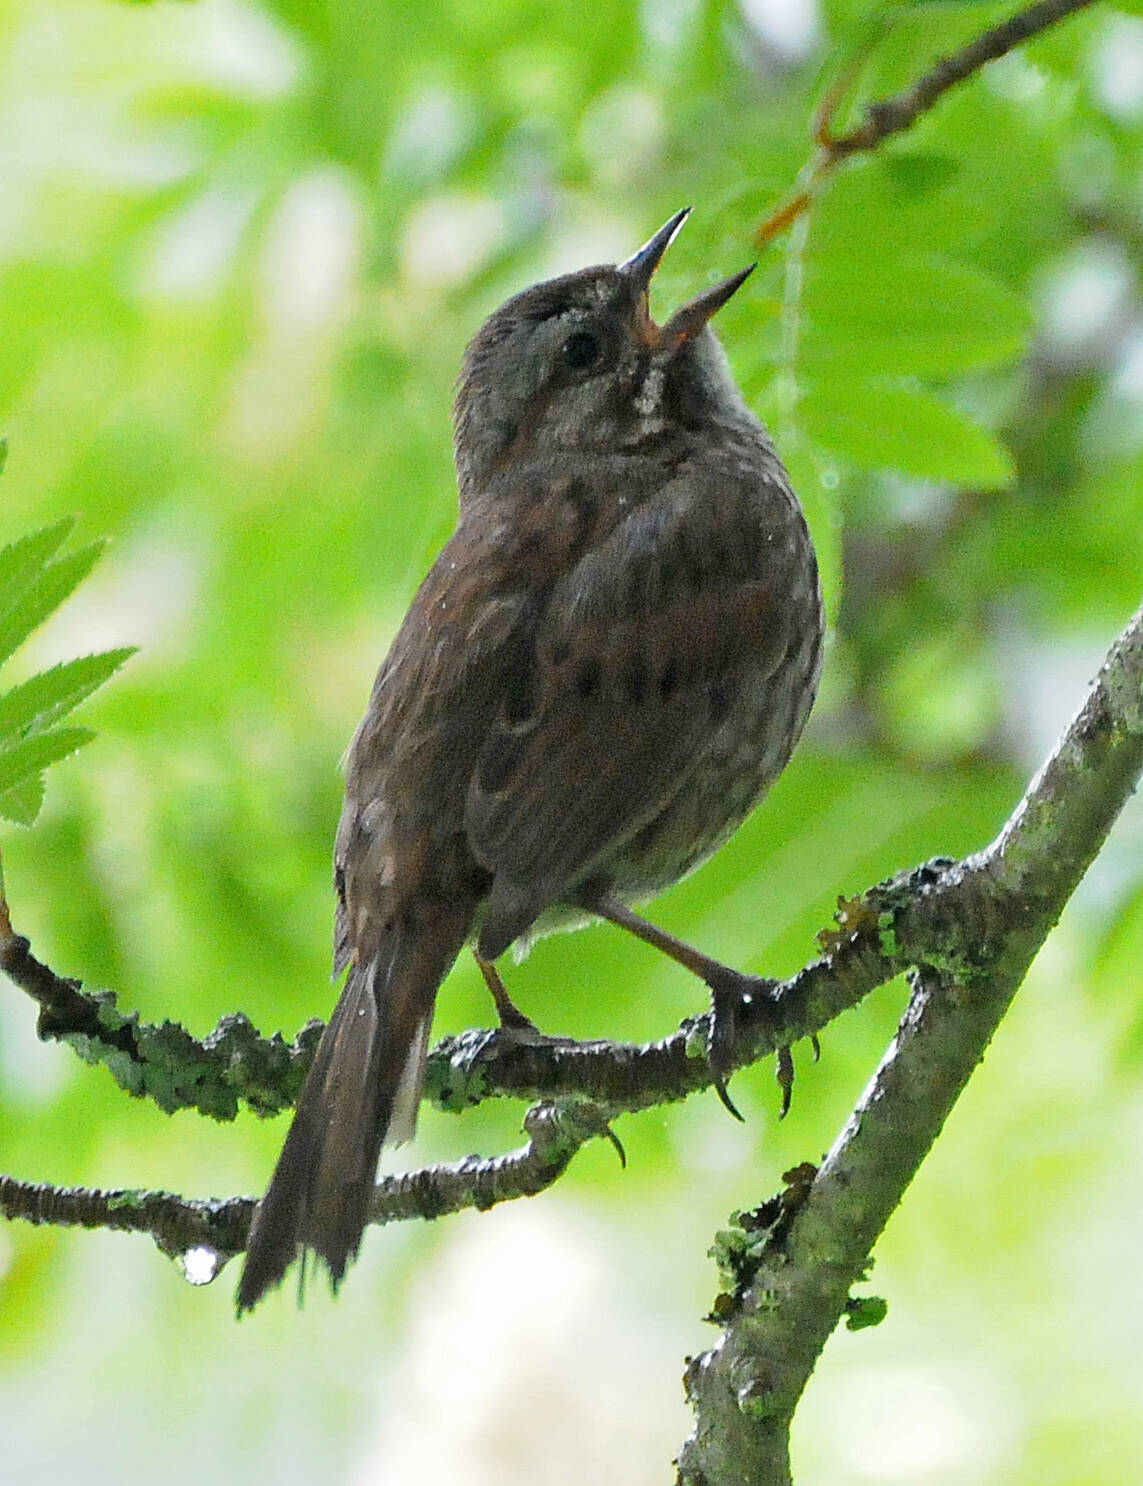 A song sparrow perched on a branch, with toes not curled (Courtesy Photo / Bob Armstrong)